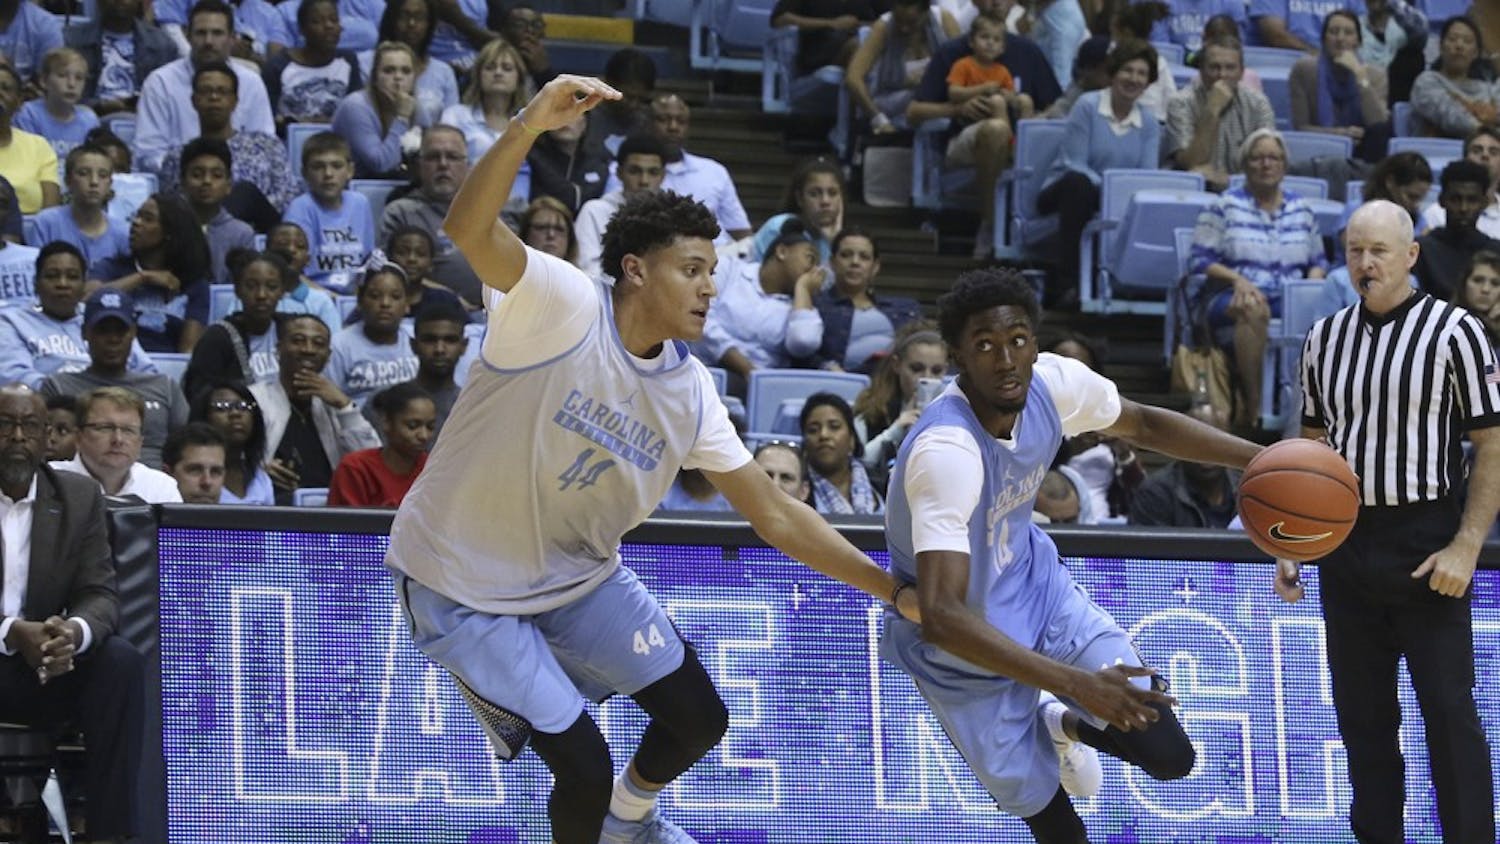 UNC first-year&nbsp;Brandon Robinson (14) drives towards the basket while being guarded by junior guard Justin Jackson (44) on Friday at Late Night with Roy.